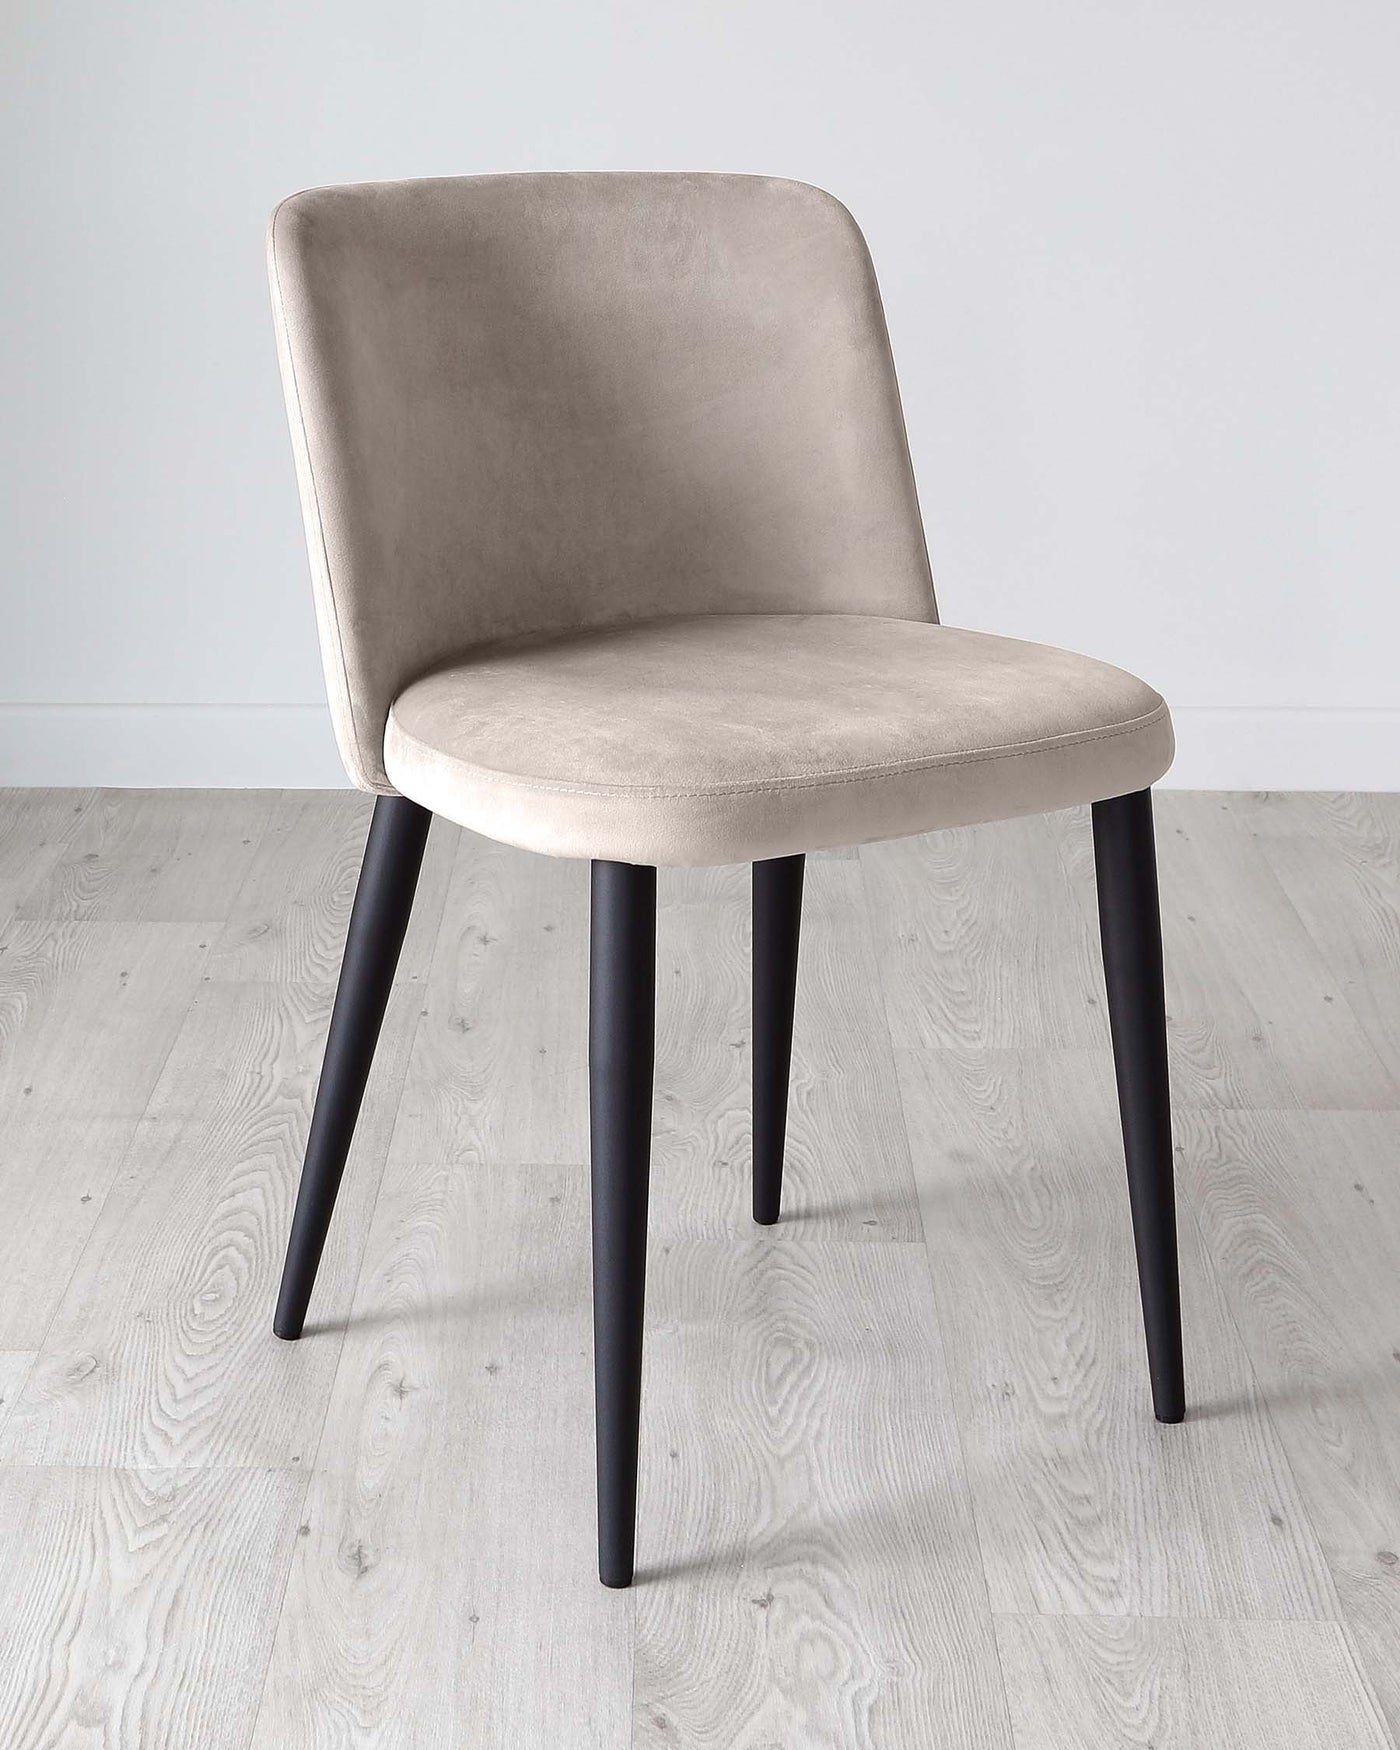 Modern chair with a taupe velvet upholstered curved backrest and seat, supported by four sleek black metal legs, positioned on a light wooden floor against a white wall background.